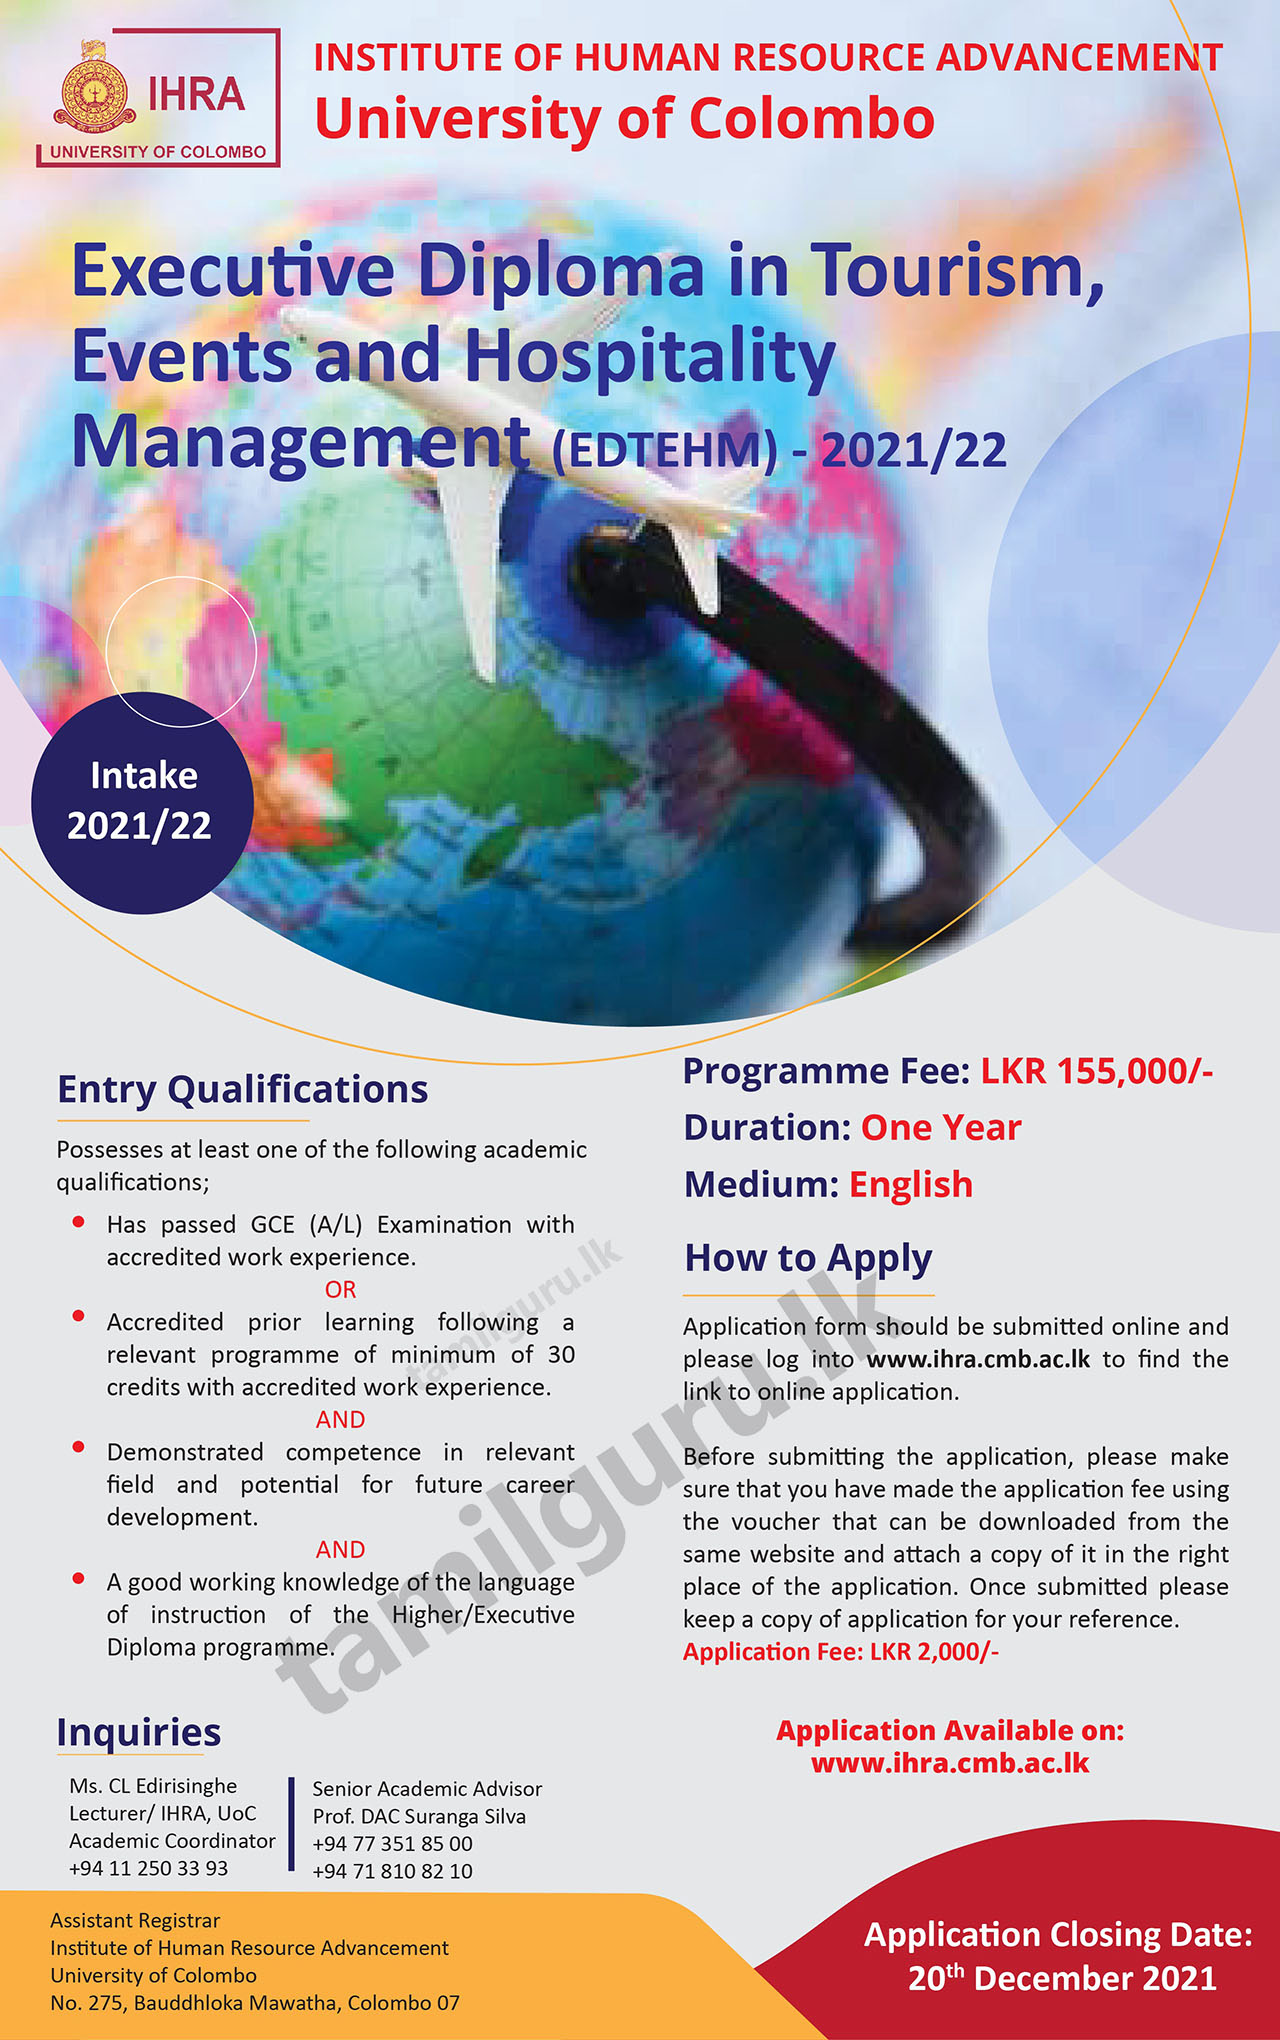 Executive Diploma in Tourism, Events and Hospitality Management (EDTEHM) 2021/2022 - University of Colombo